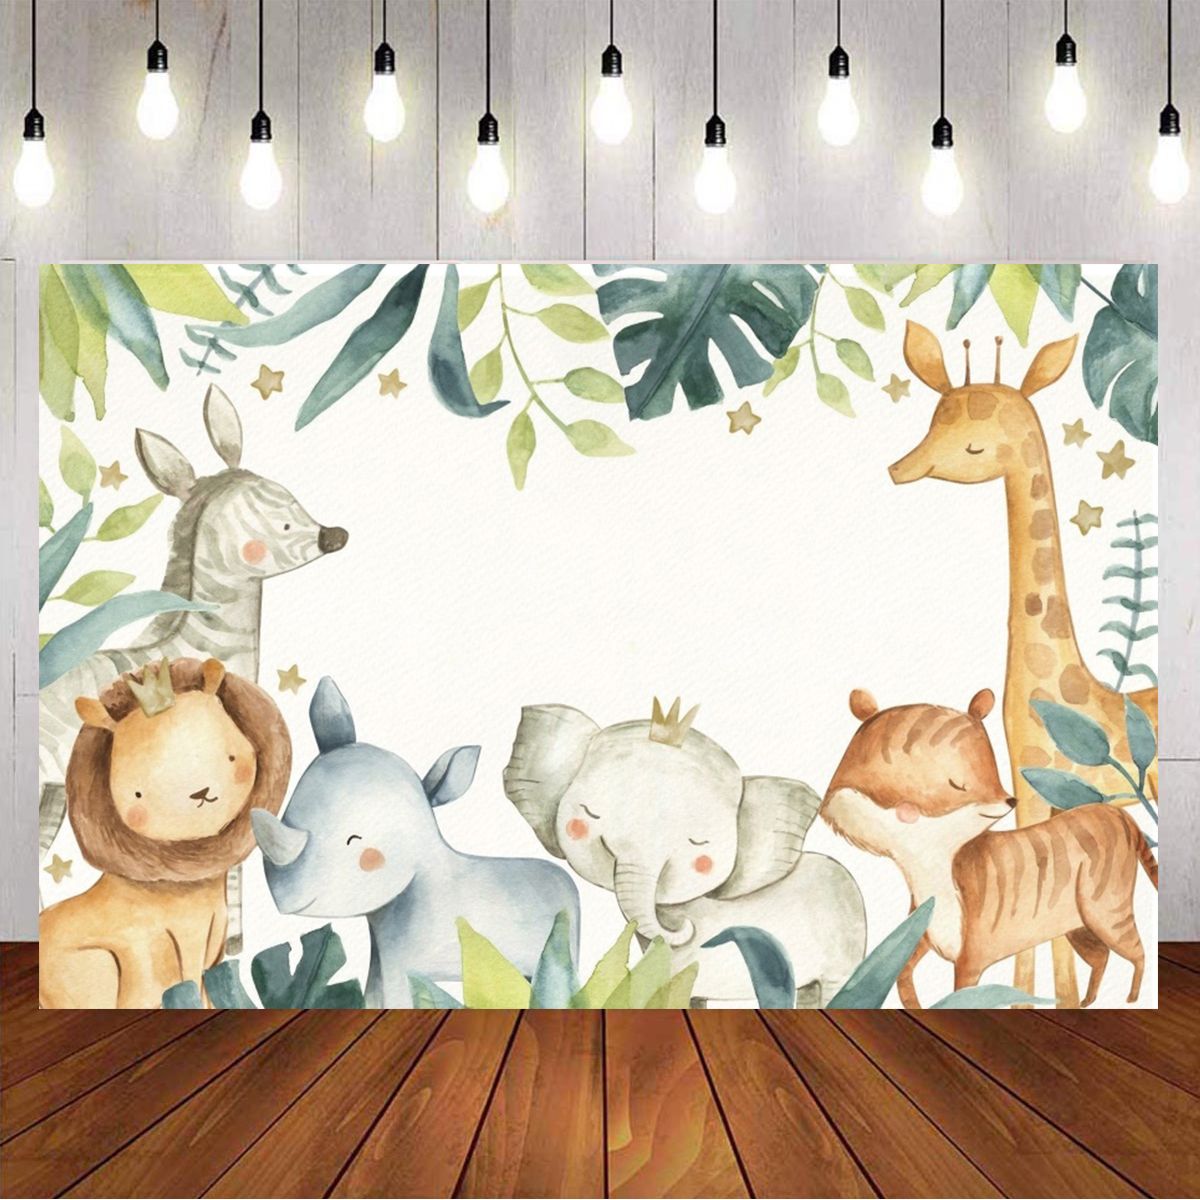 5x3FT-7x5FT-9x6FT-Cartoon-Forest-Animal-Birthday-Studio-Photography-Backdrops-Background-1680223